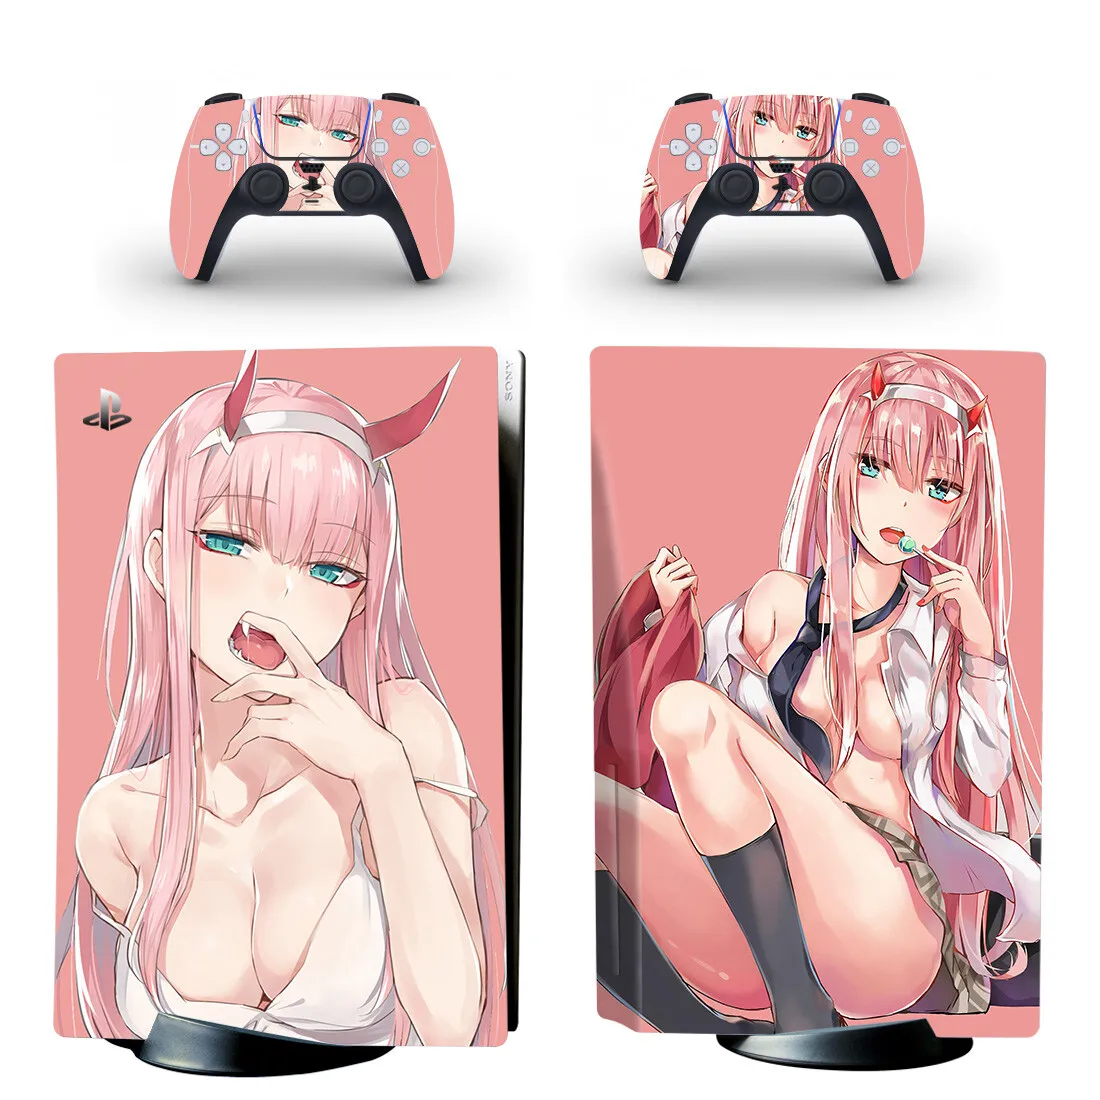 Anime Cute Girl Zero Two PS5  Disc Sticker Decal Cover for PlayStation 5 Console and 2 Controllers PS5 Disk Skin Vinyl